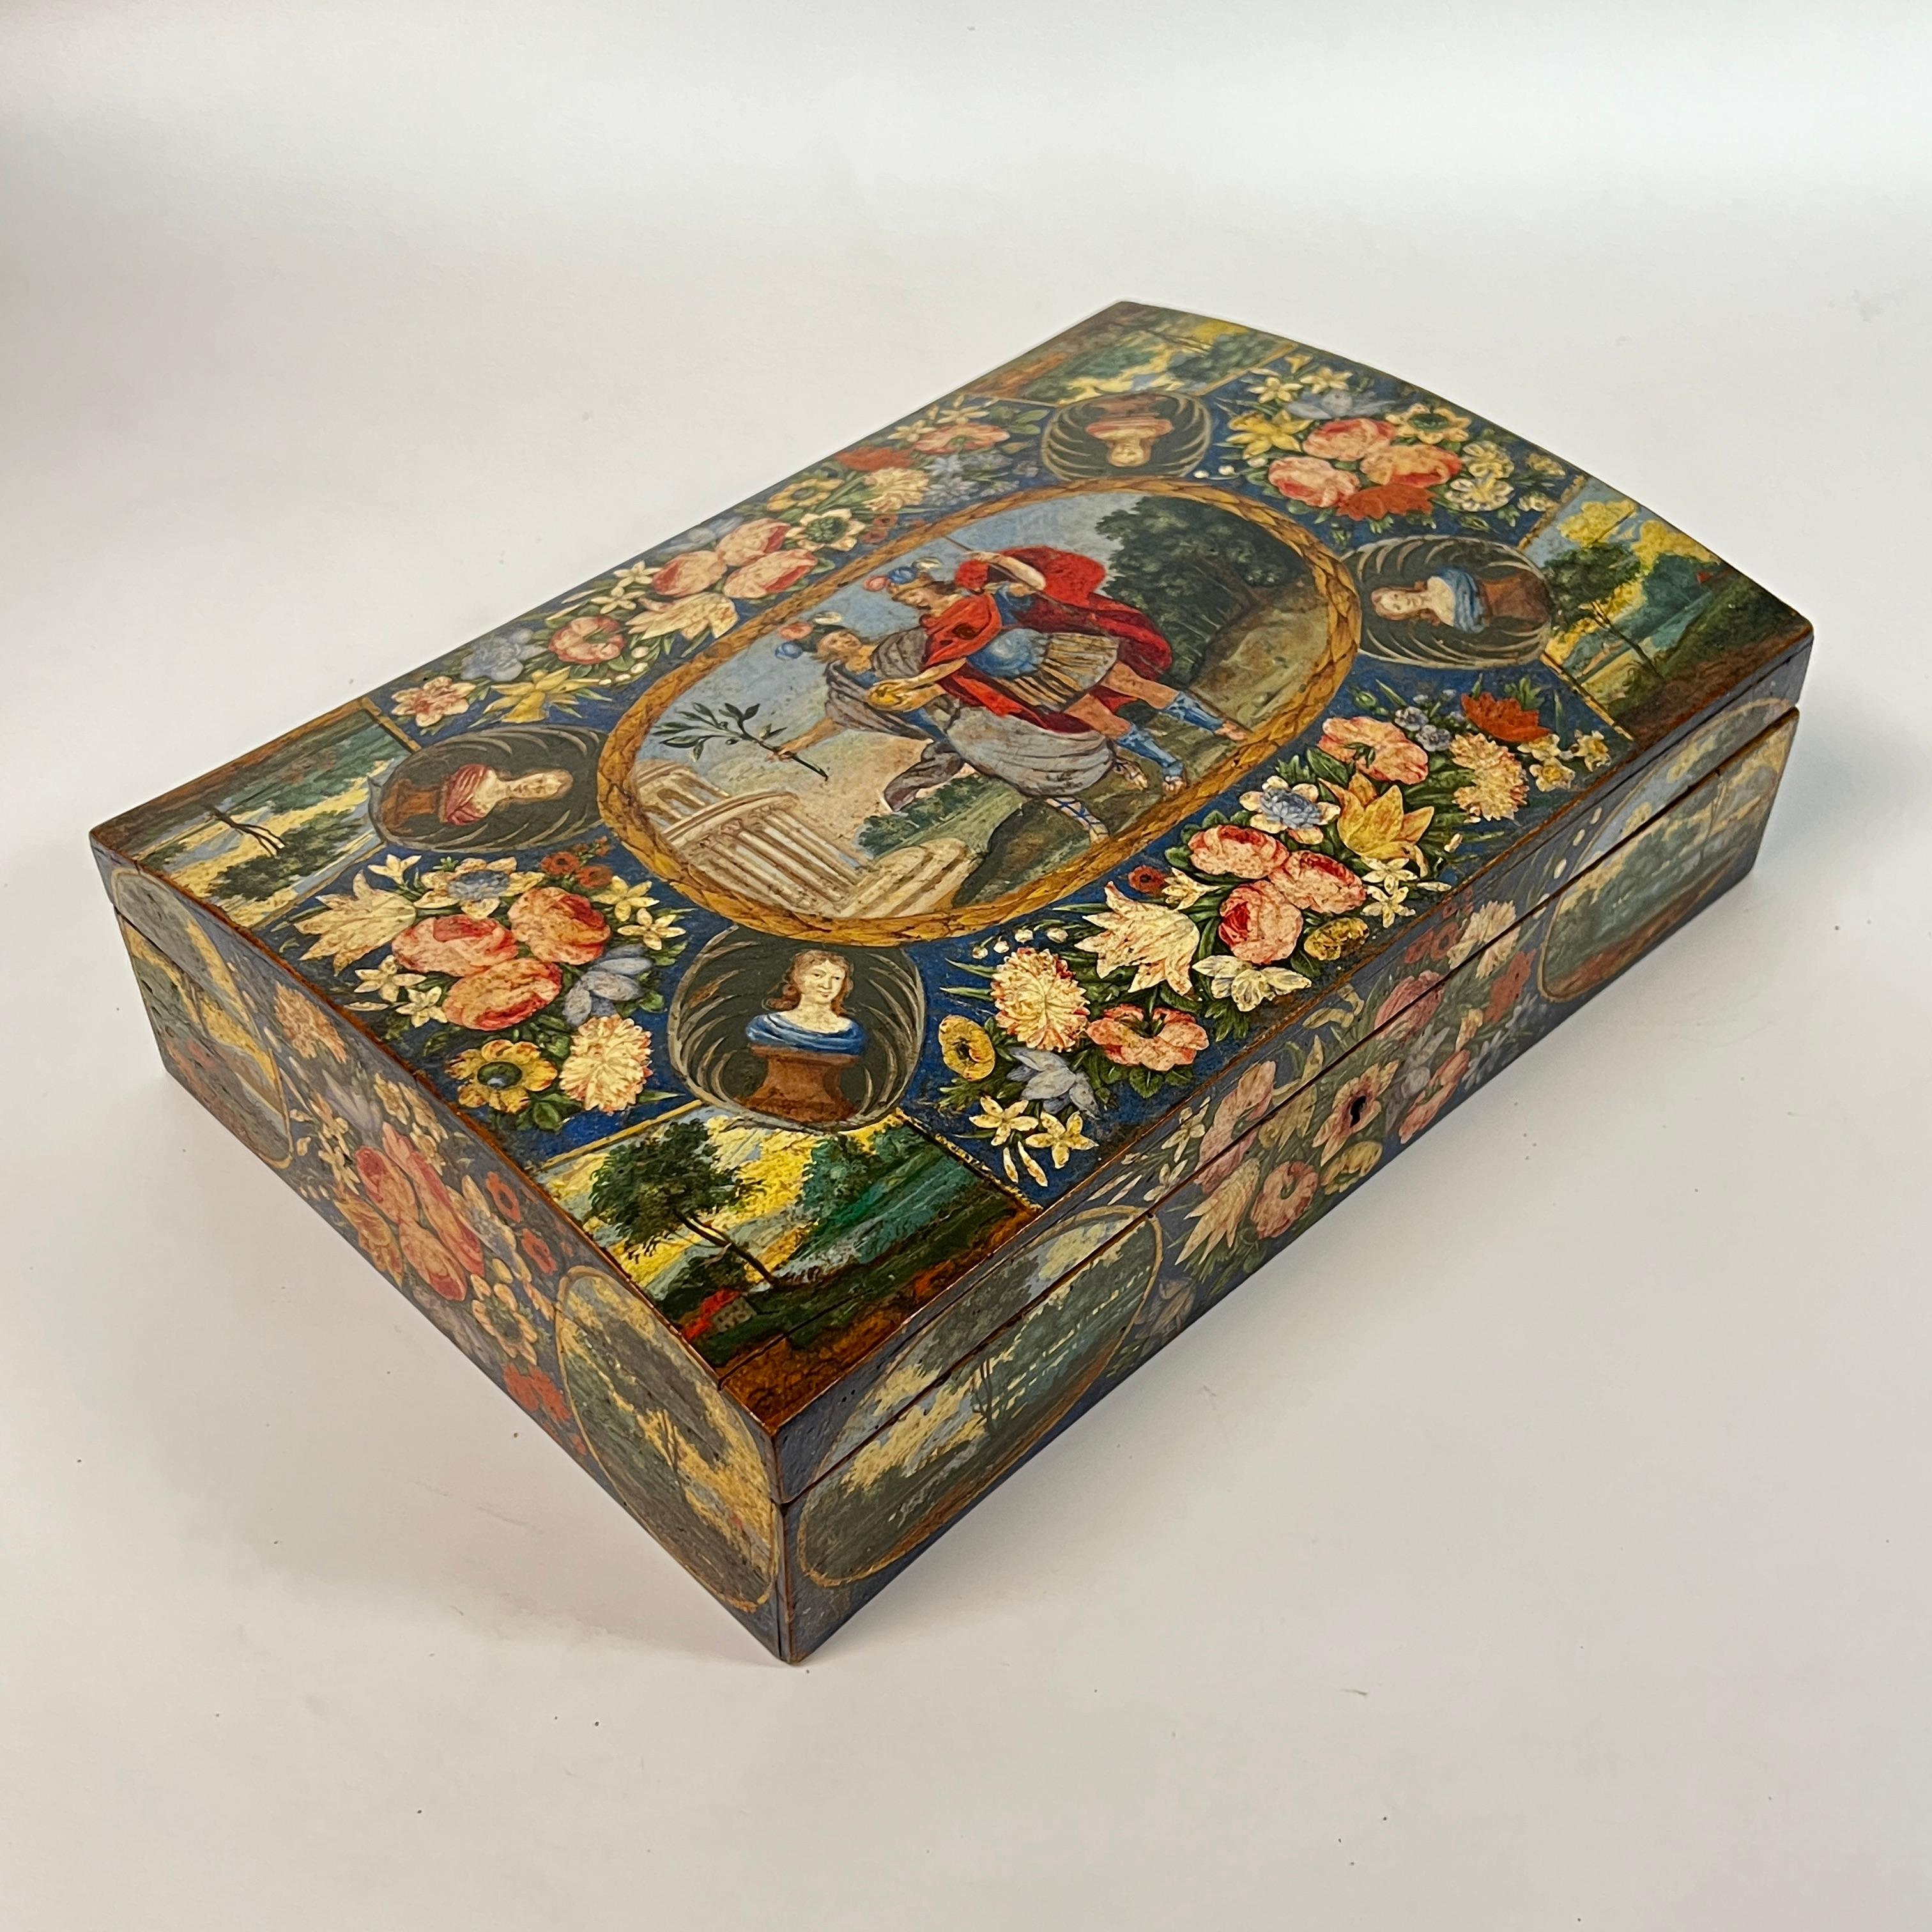 Hand-Painted Louis XIV Period Polychrome-Painted Casket Writing Box